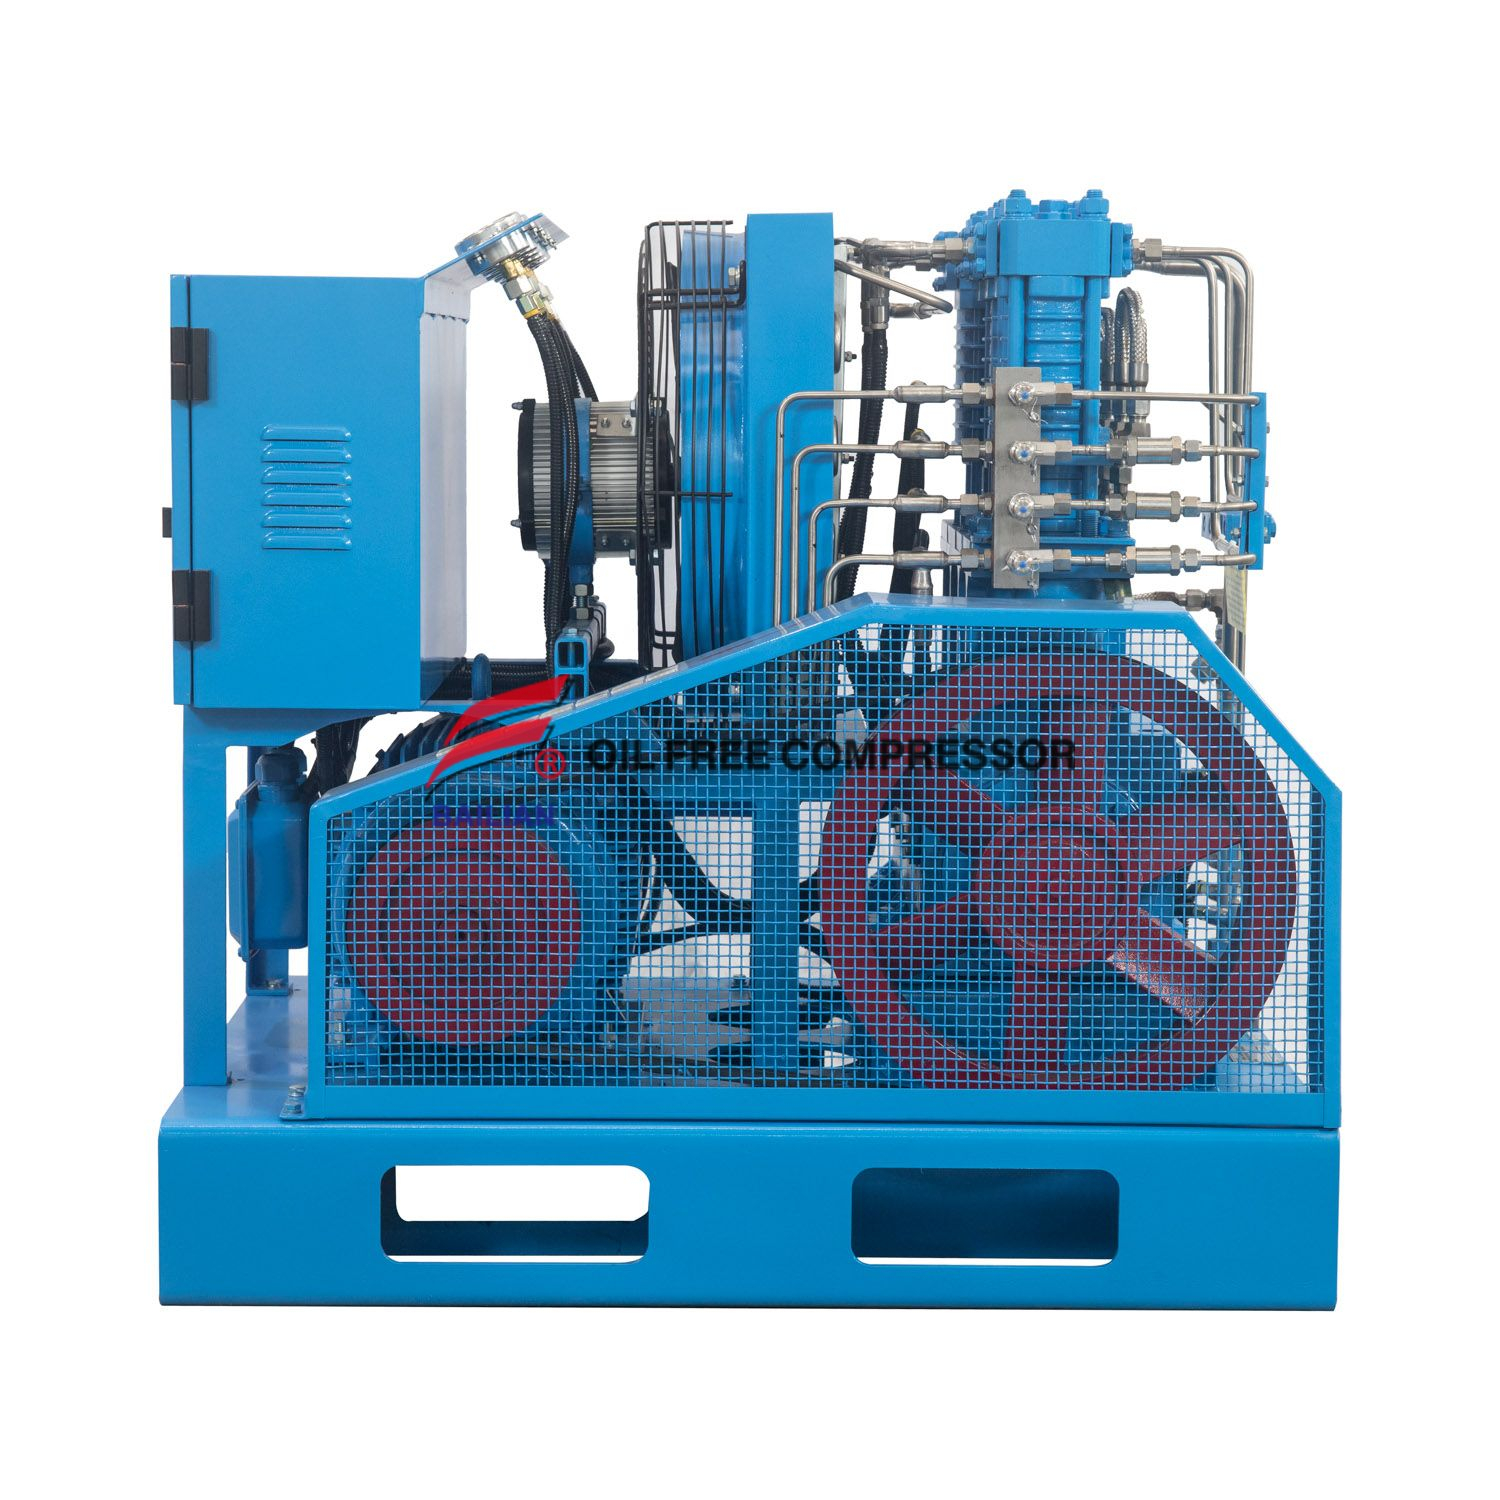 GOW-18/4-150 100%Totally Oil Free Type Oxygen Compressor